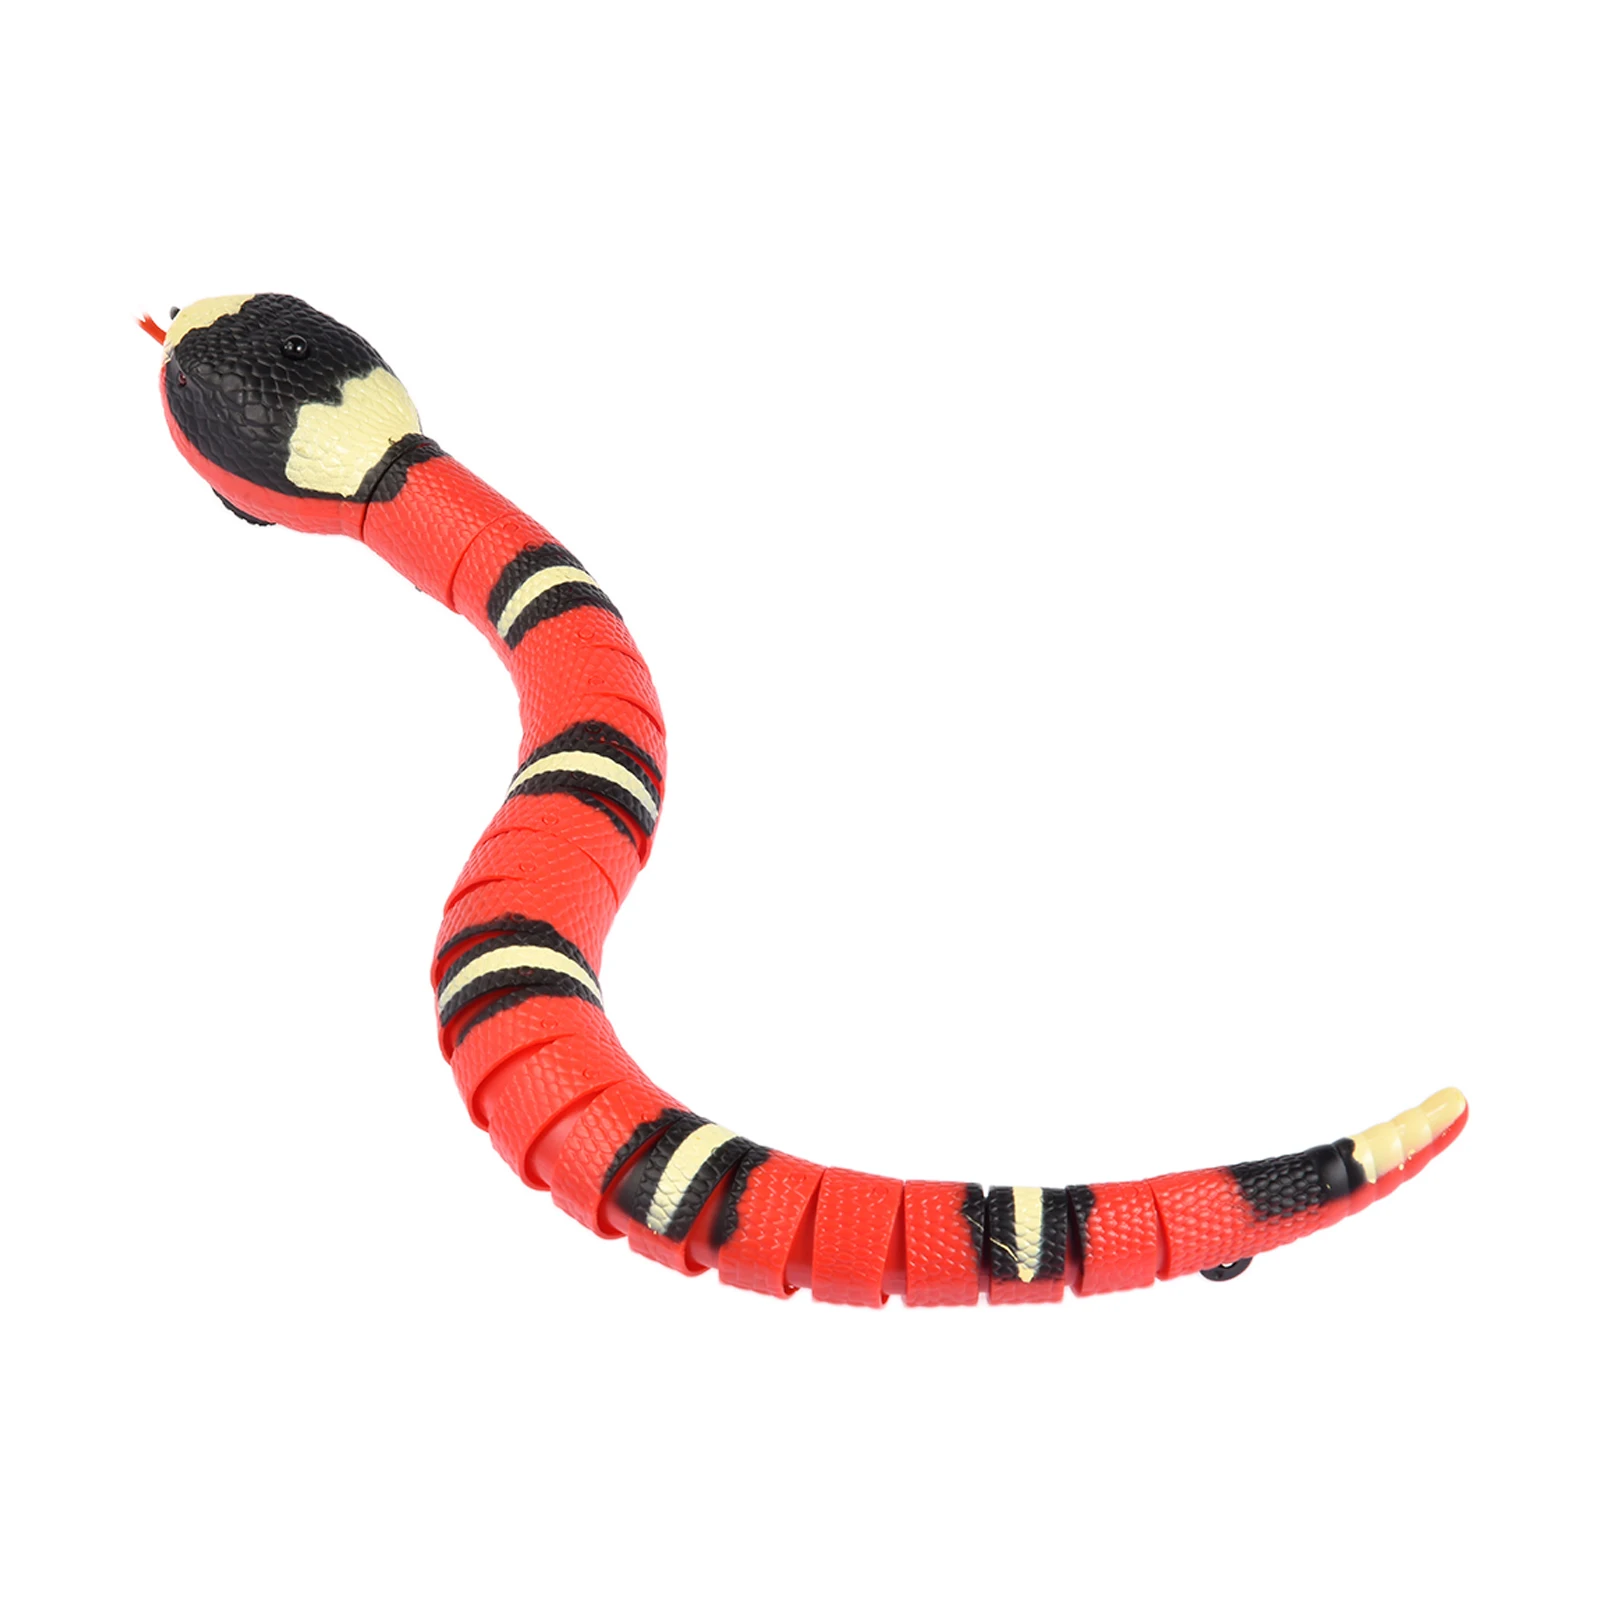 Smart Sensing Snake Toy Cat Interactive Toys Smart Electric Pet Toys Gag Gift For Kids USB Charging Cat Accessories For Pet Dogs